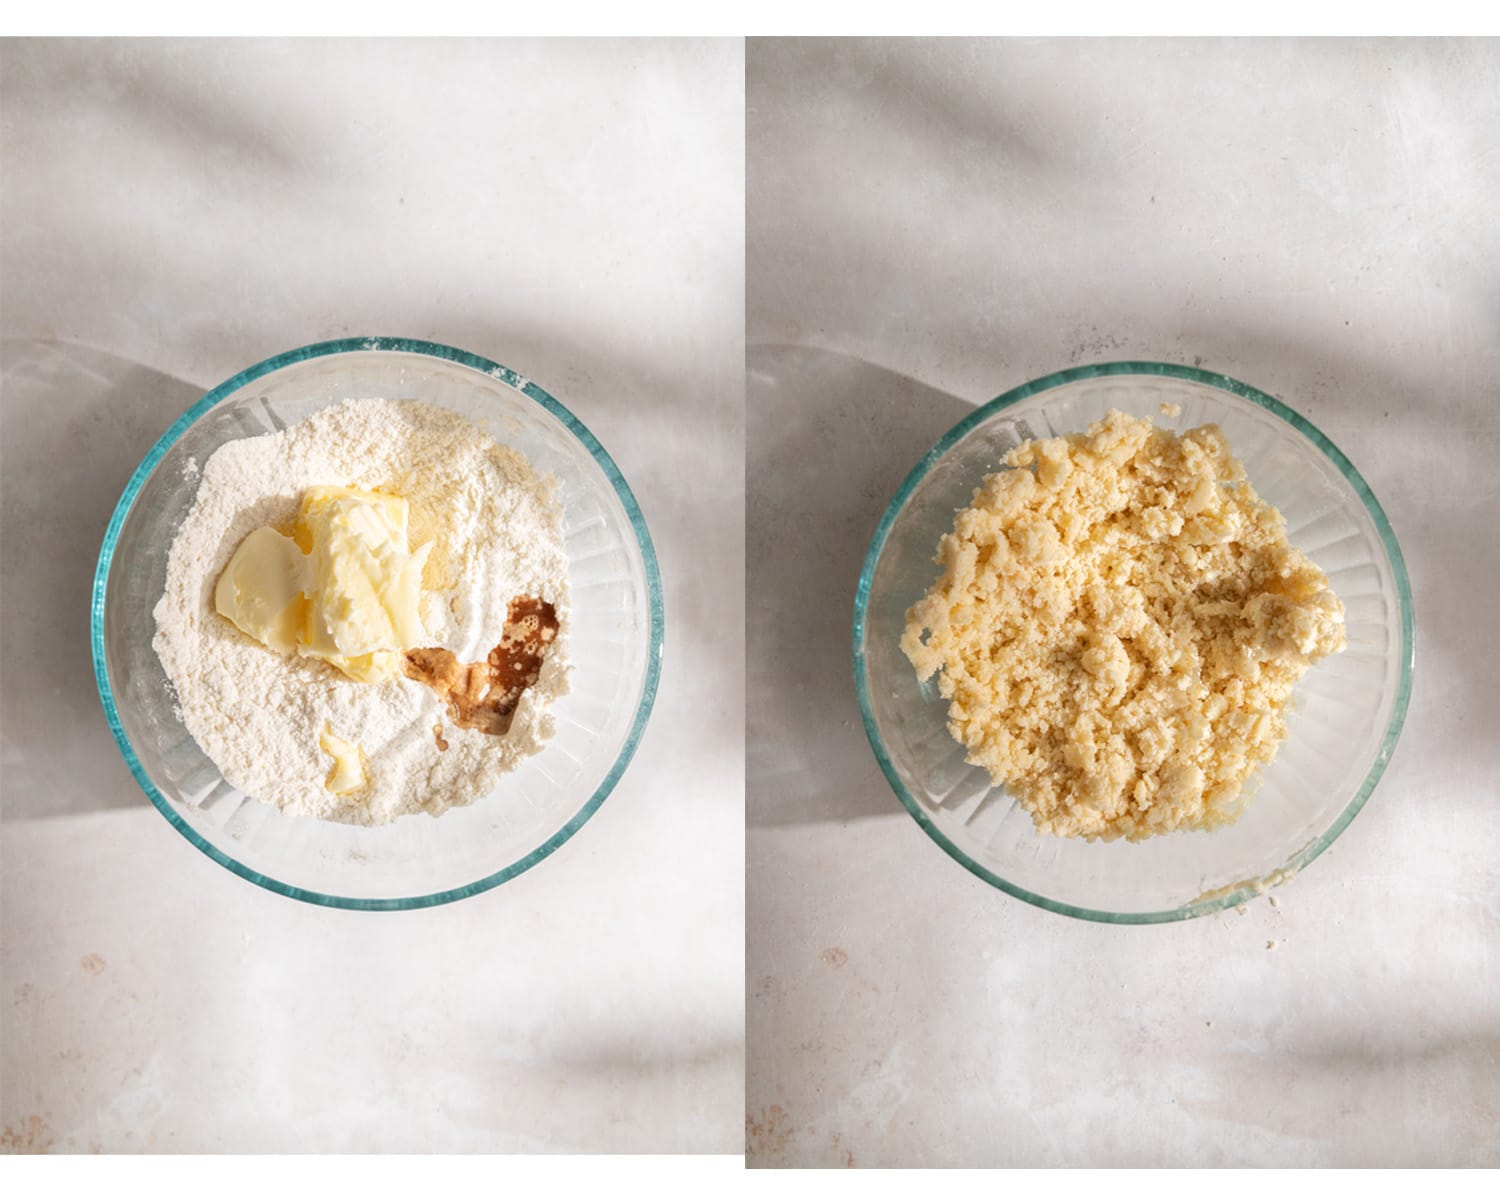 Process images showing how to make the peach streusel topping. 